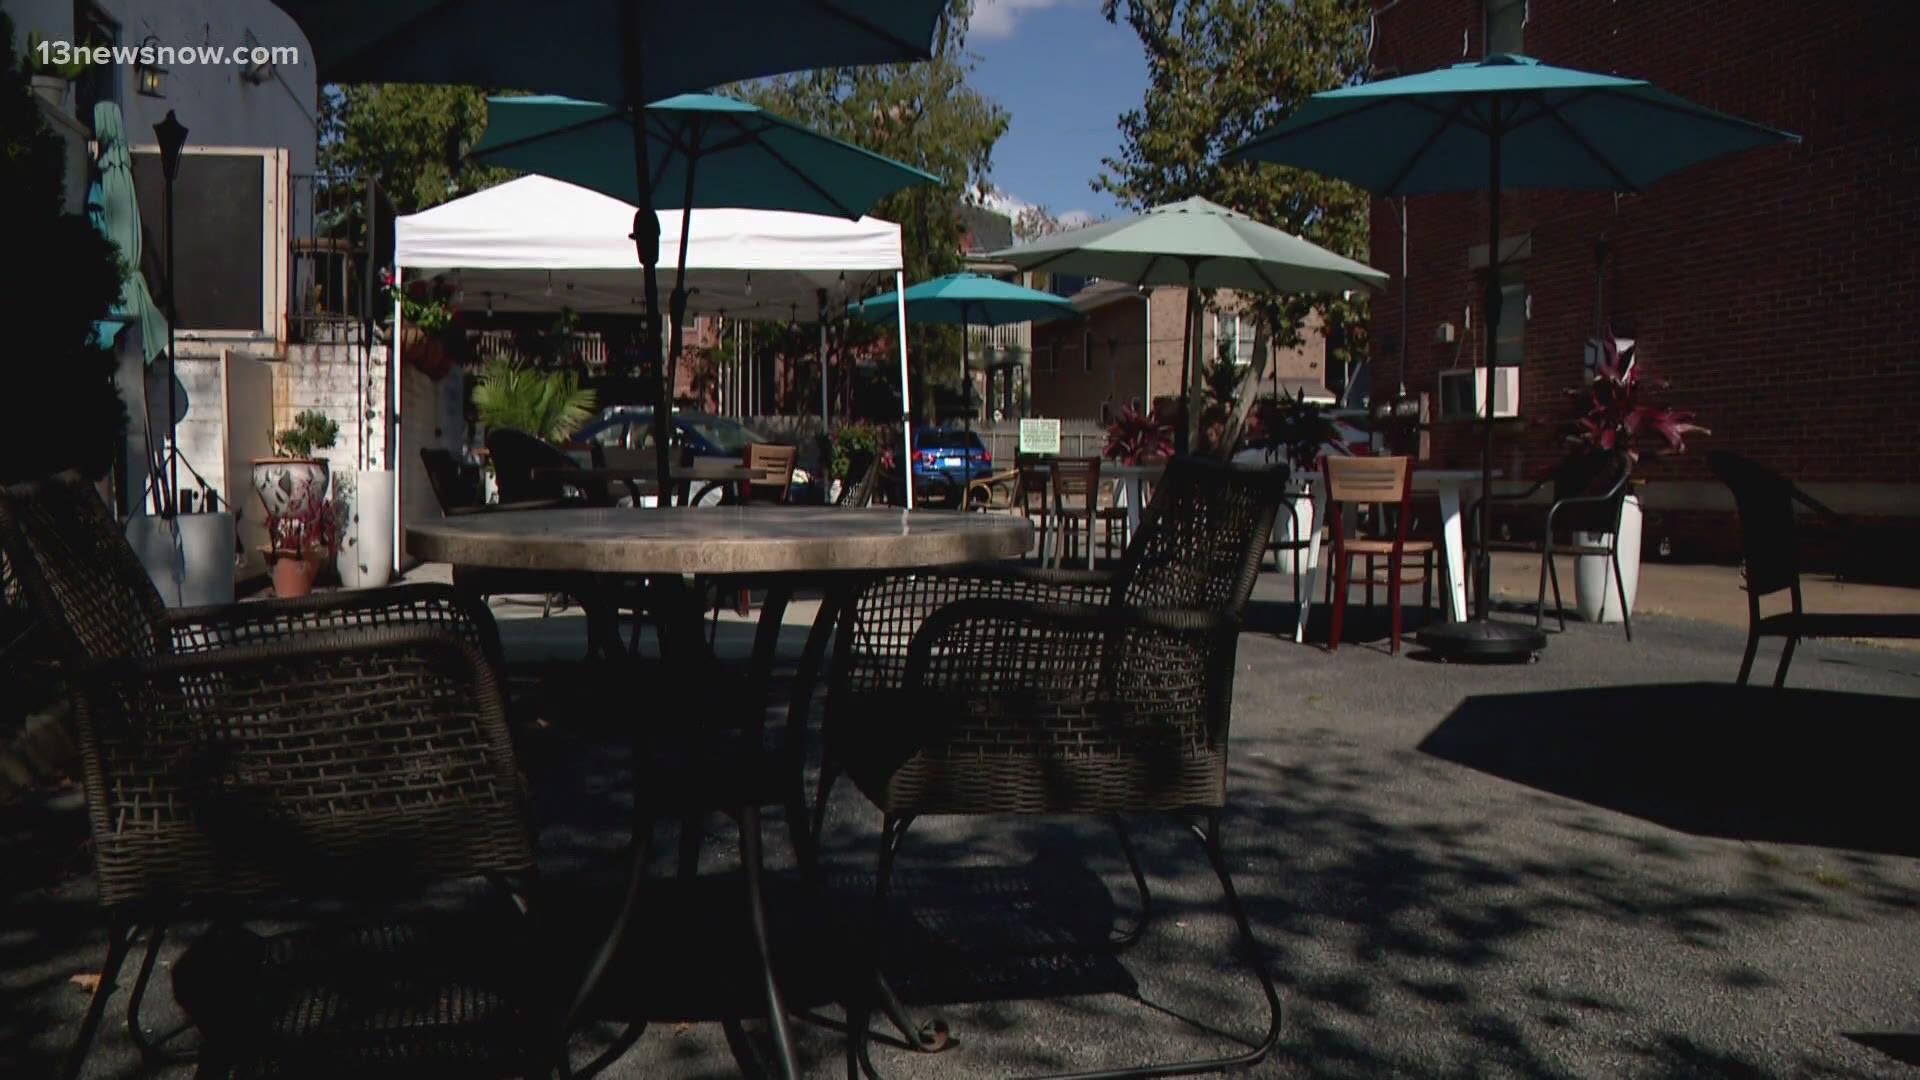 When it starts getting cold outside, restaurant owners might have trouble serving outdoors. So, they're planning ahead to find ways to keep patrons warm and dry.